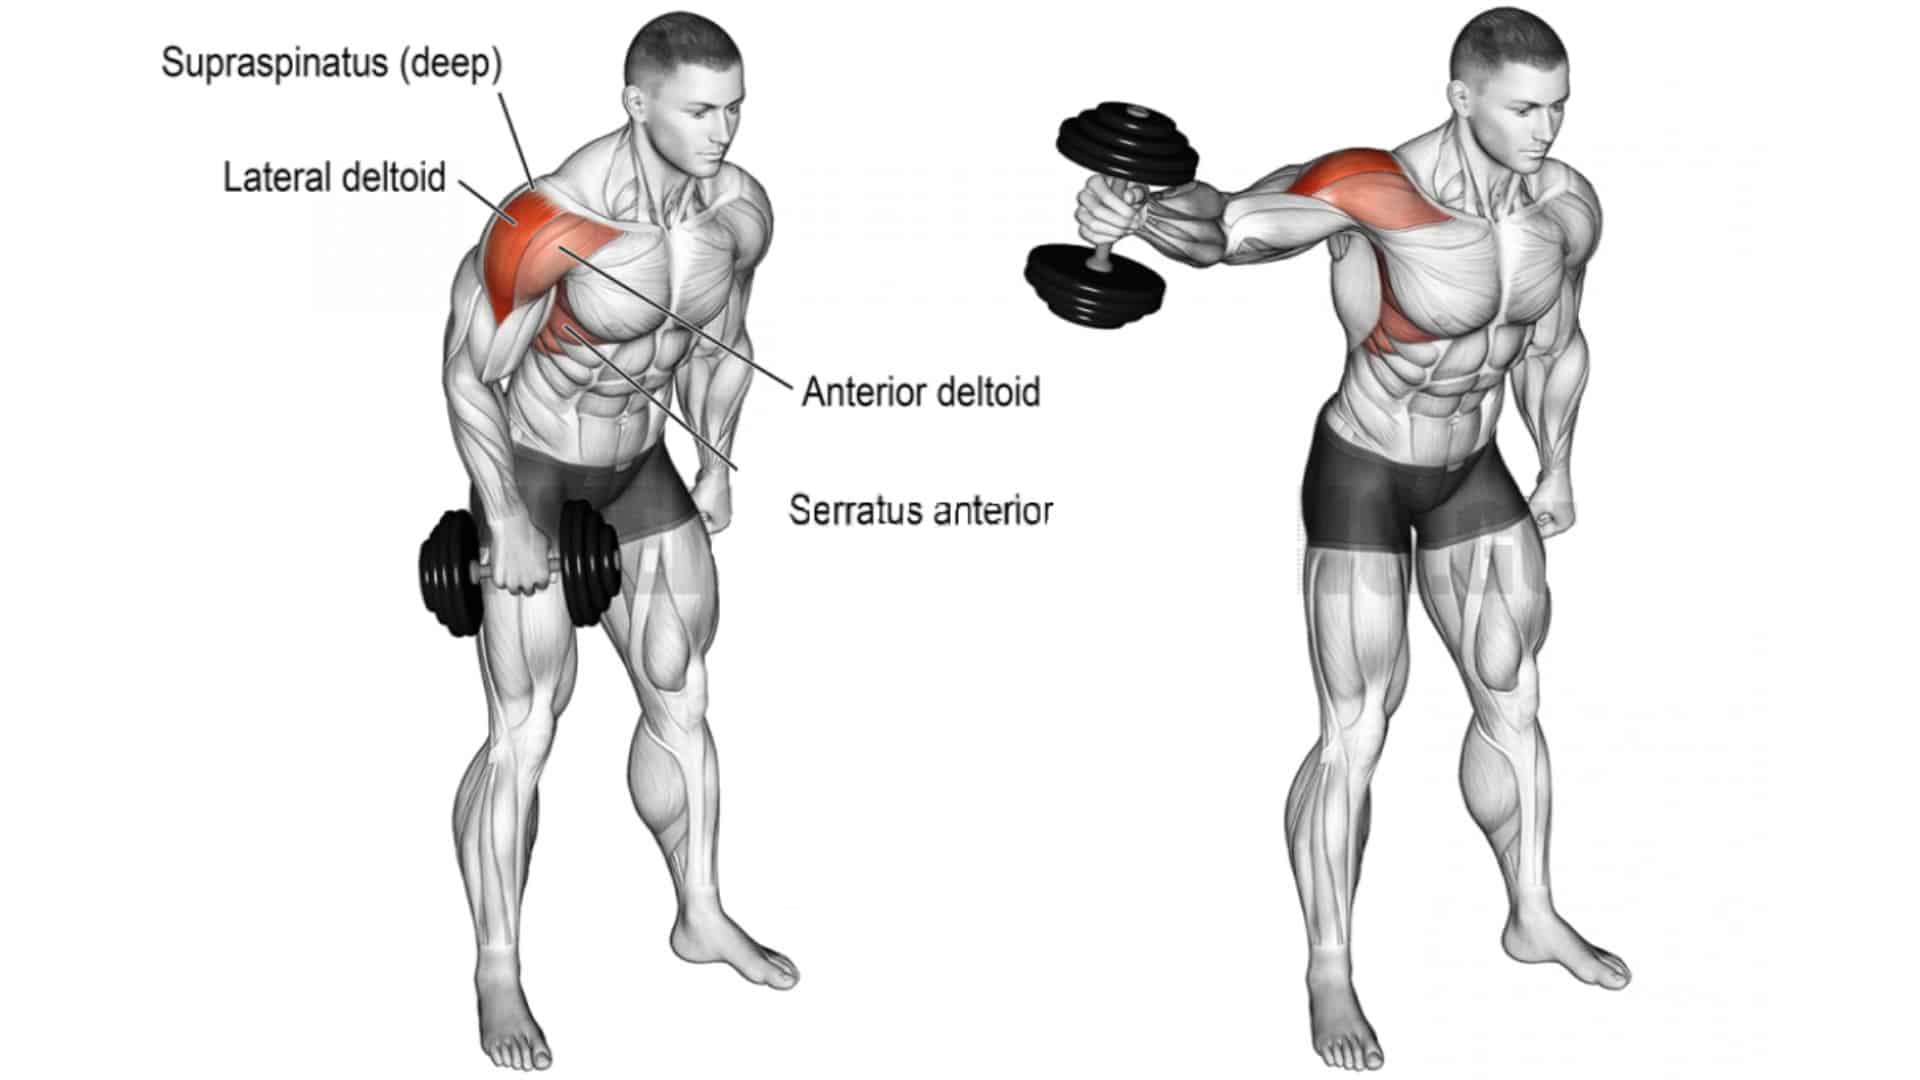 Dumbbell one-arm lateral raise